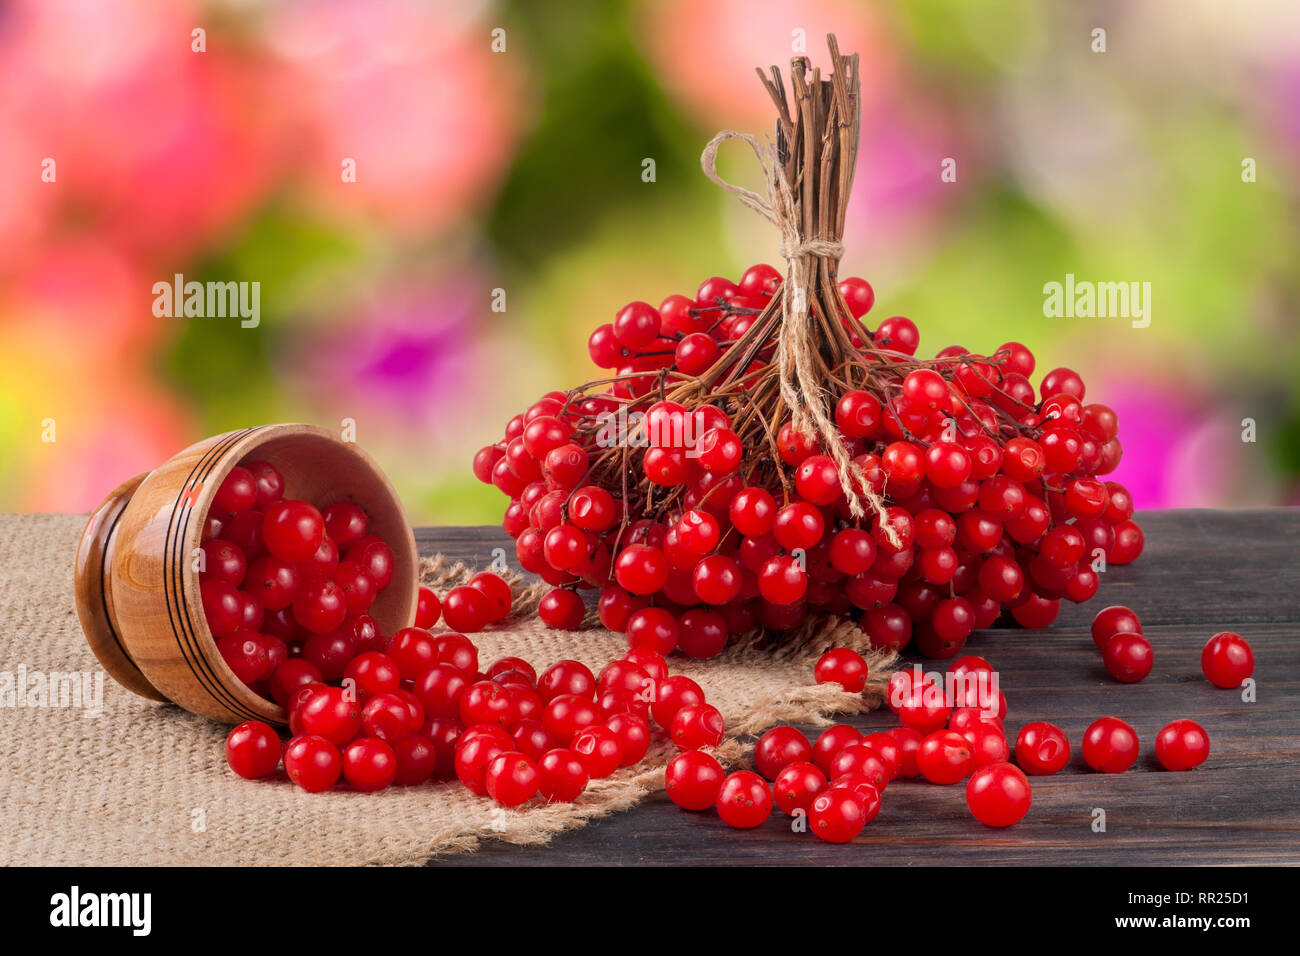 ripe red viburnum berries in a wooden bowl on table with blurred garden background Stock Photo